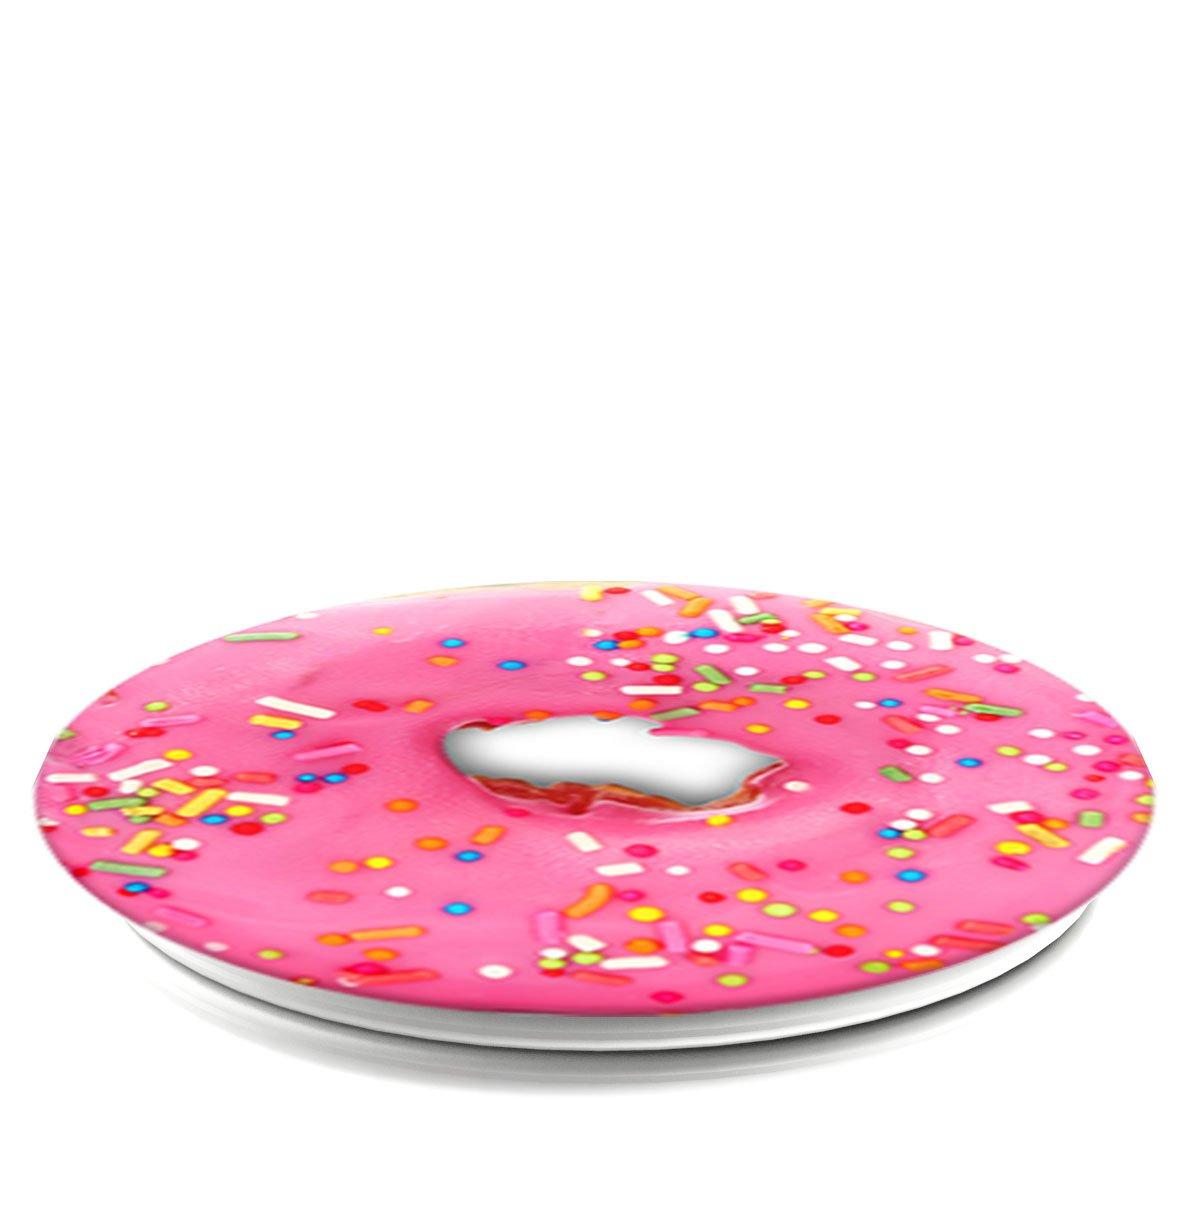 list item 3 of 4 PopSockets Pink Donut Phone Grip and Stand